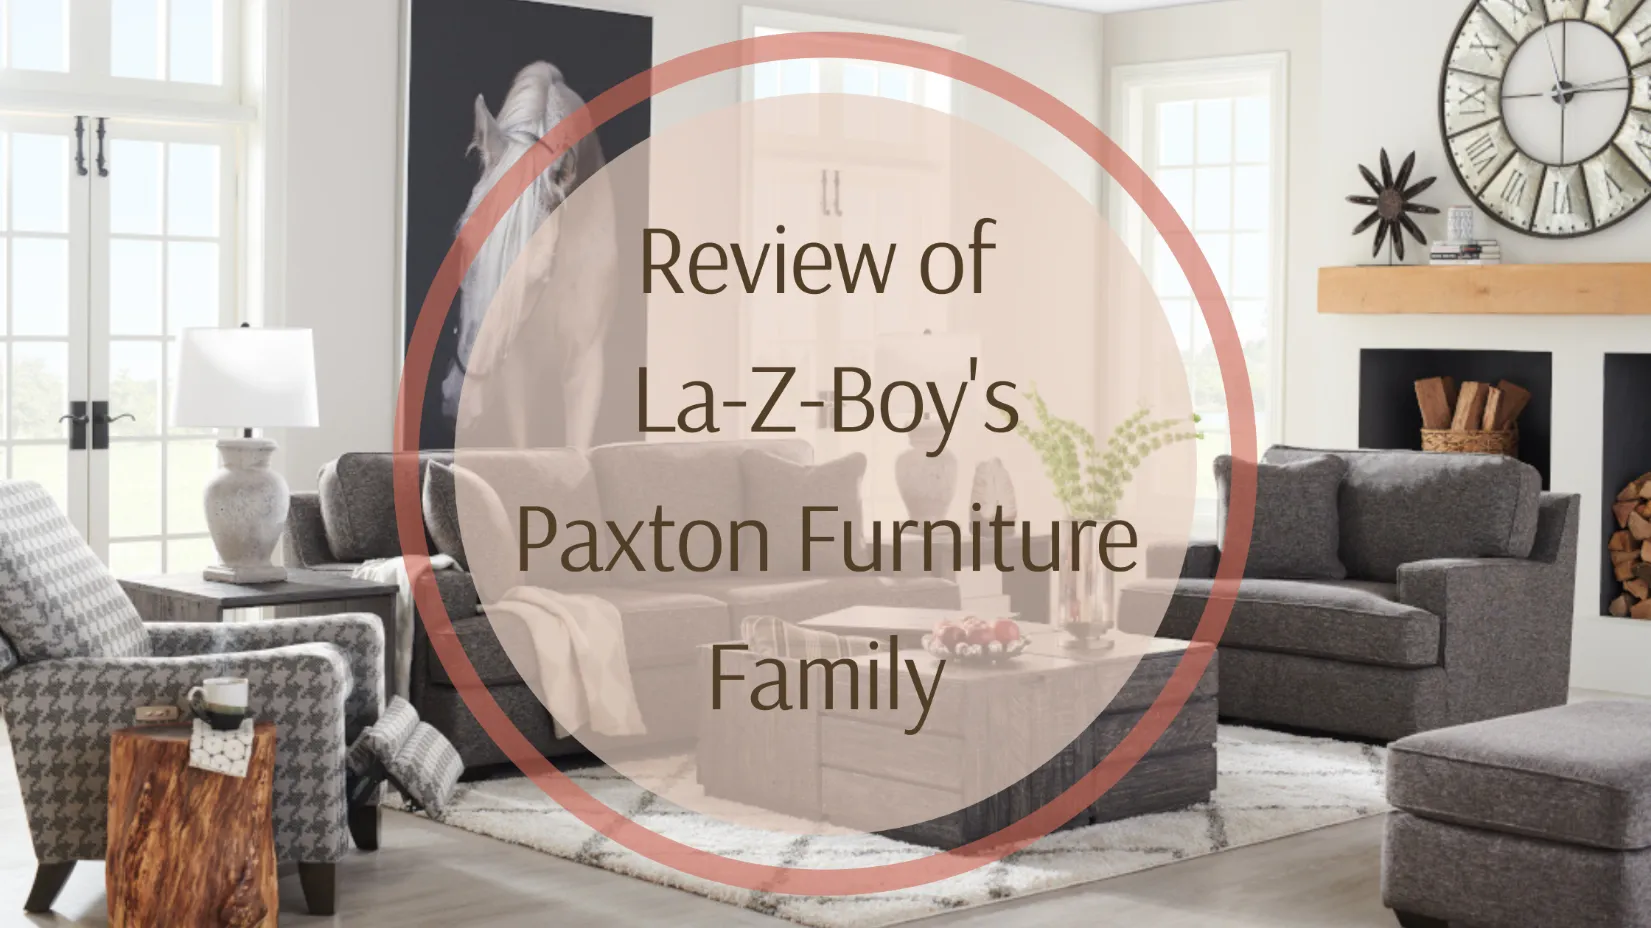 Review of the La-Z-Boy Paxton Furniture Family: Chair, Loveseat, Sofa & Sectional